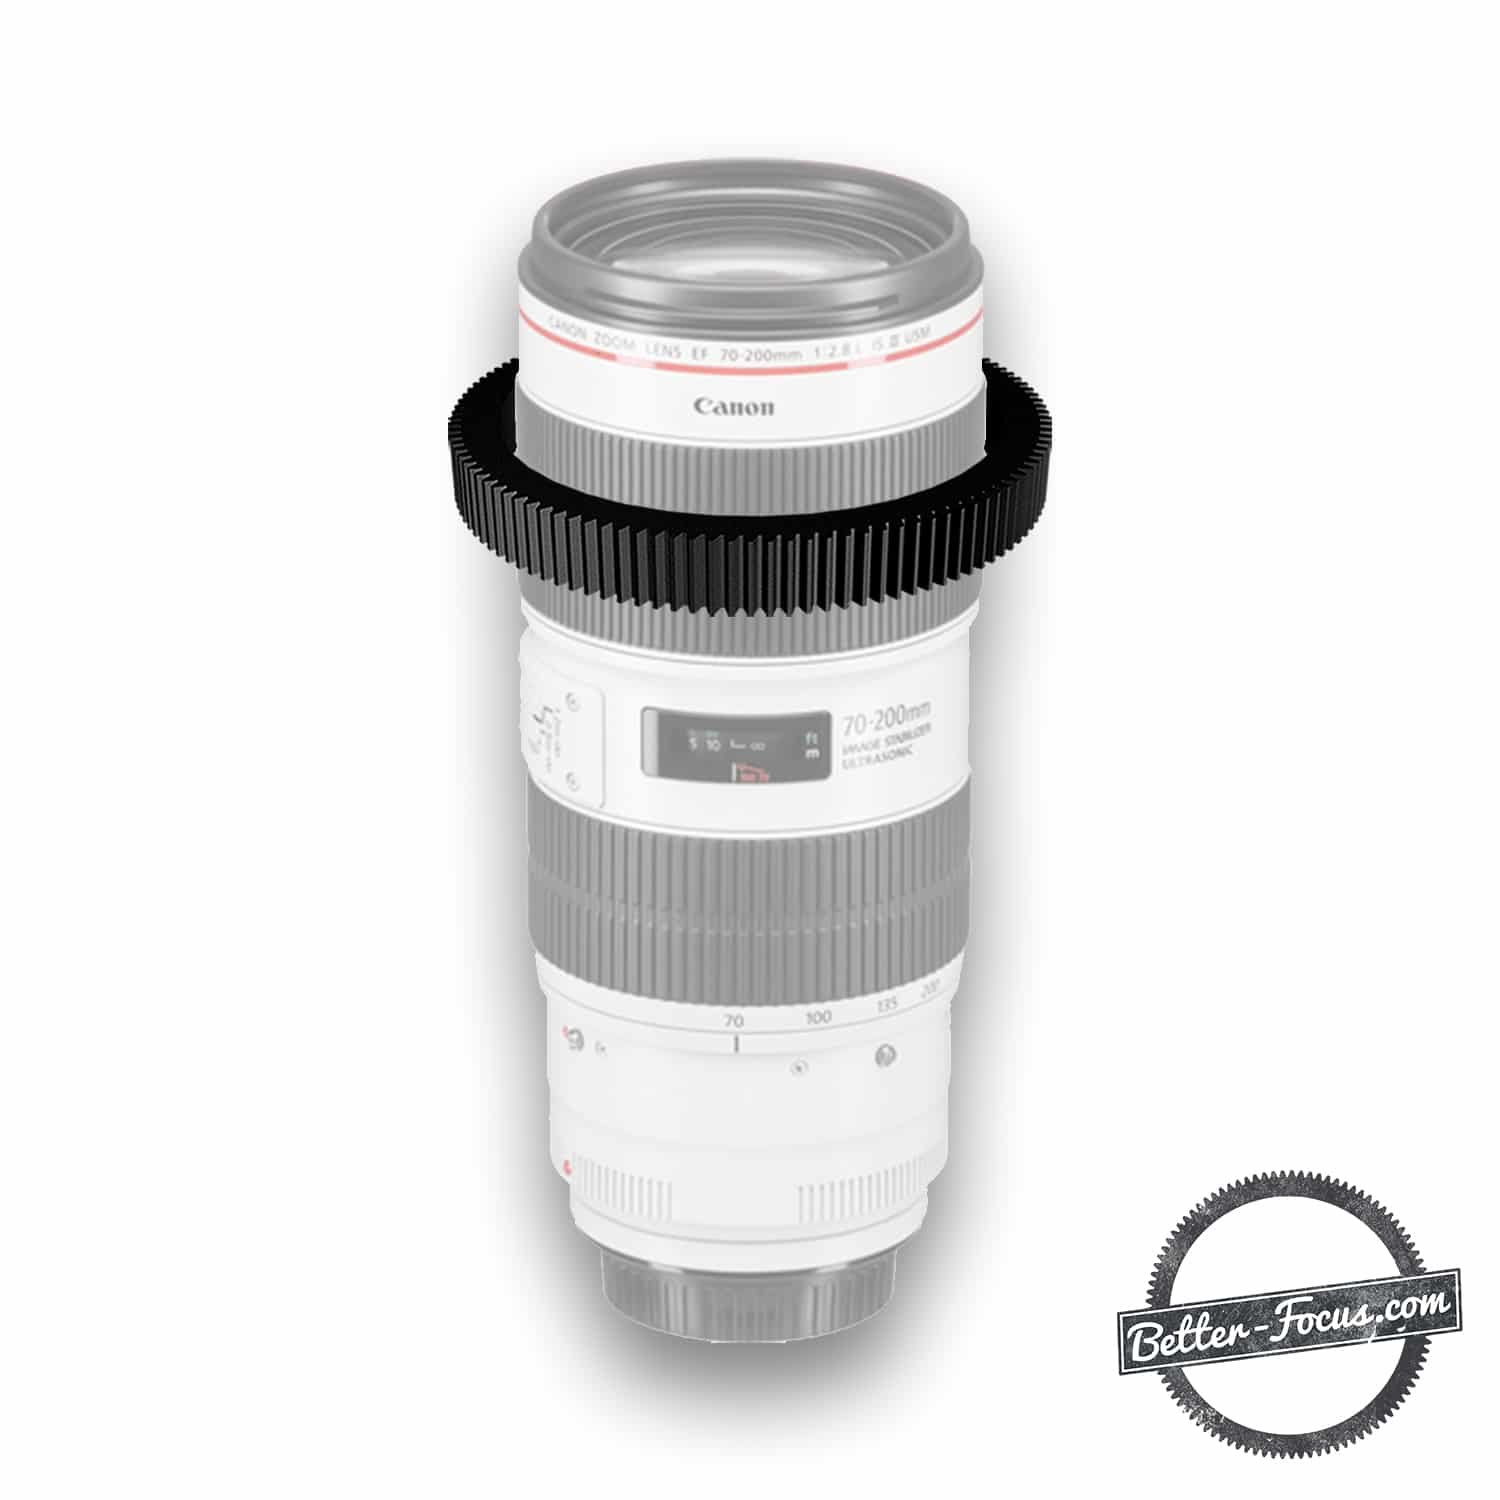 Follow Focus Gear for CANON EF 70-200MM F2.8 L SERIES USM IS (MK1)  lens